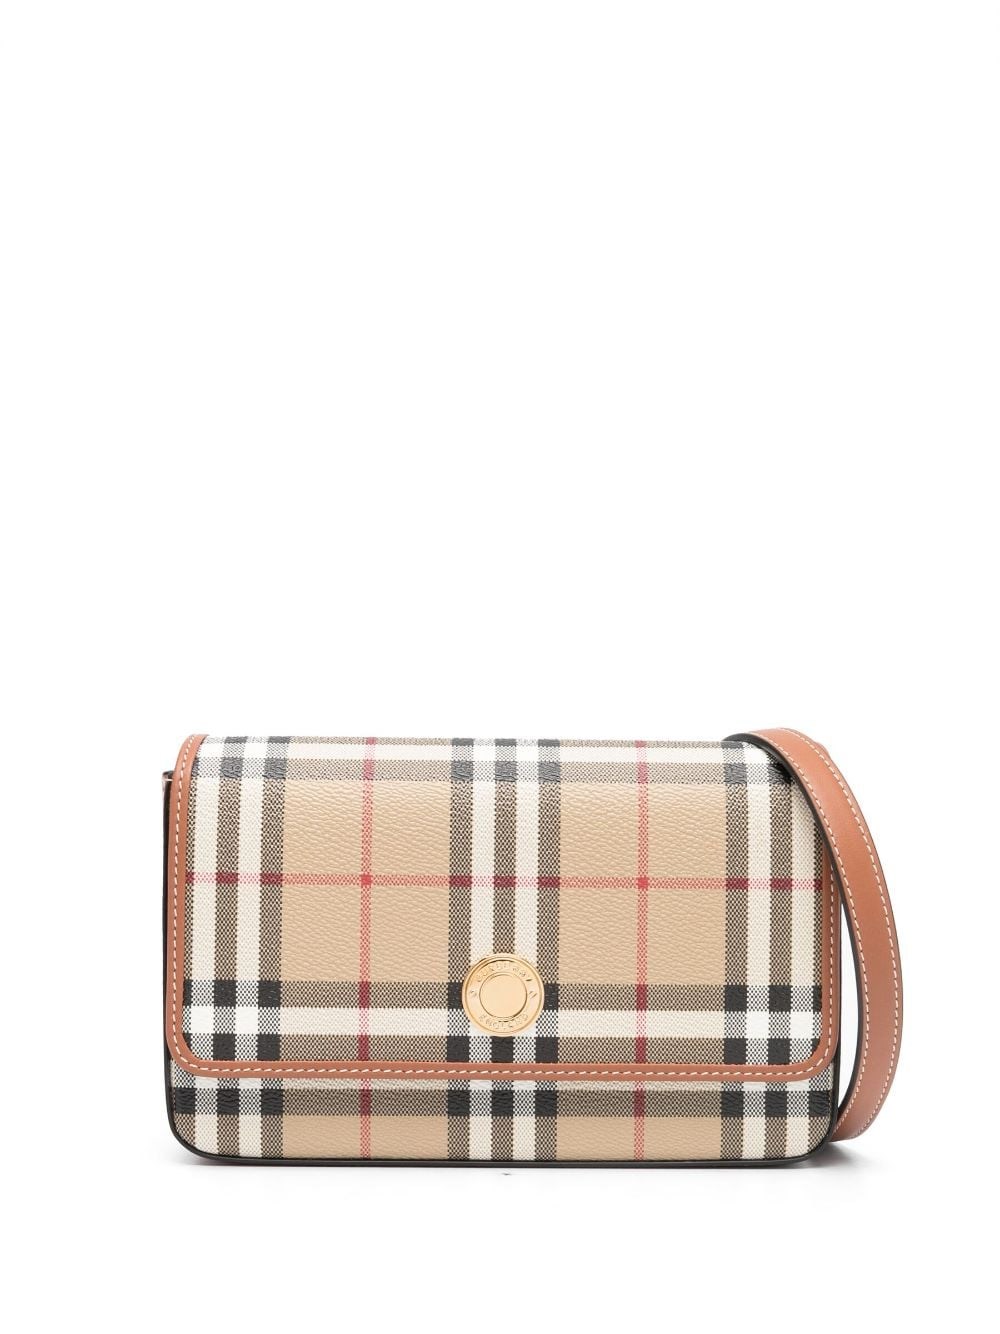 Burberry Hampshire Bag In Brown